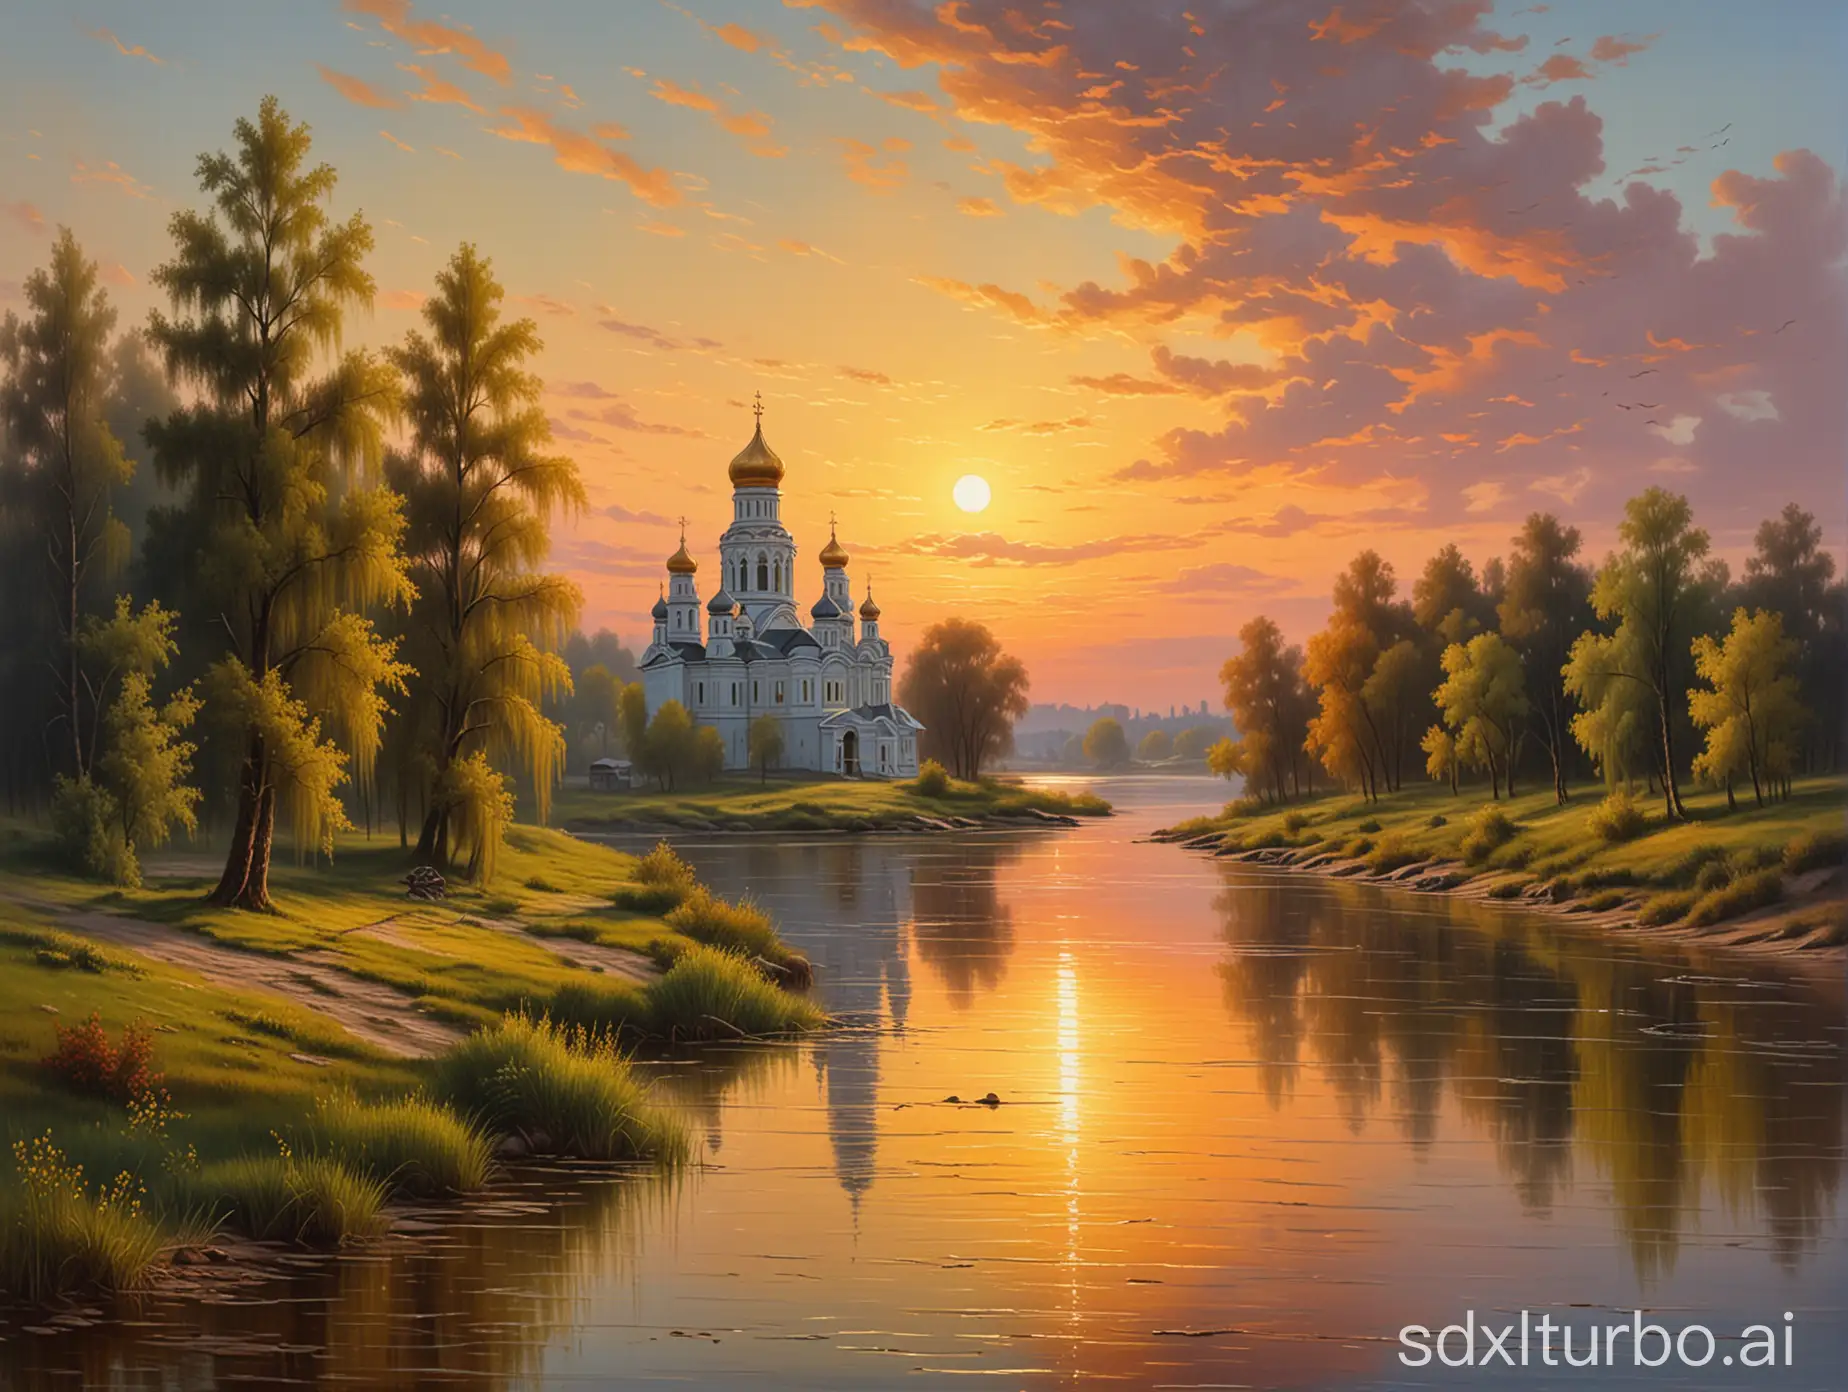 The Eastern Orthodox Church along the river, sunset, and riverbank, featuring classical Russian style oil paintings, presents a mysterious atmosphere in the painting